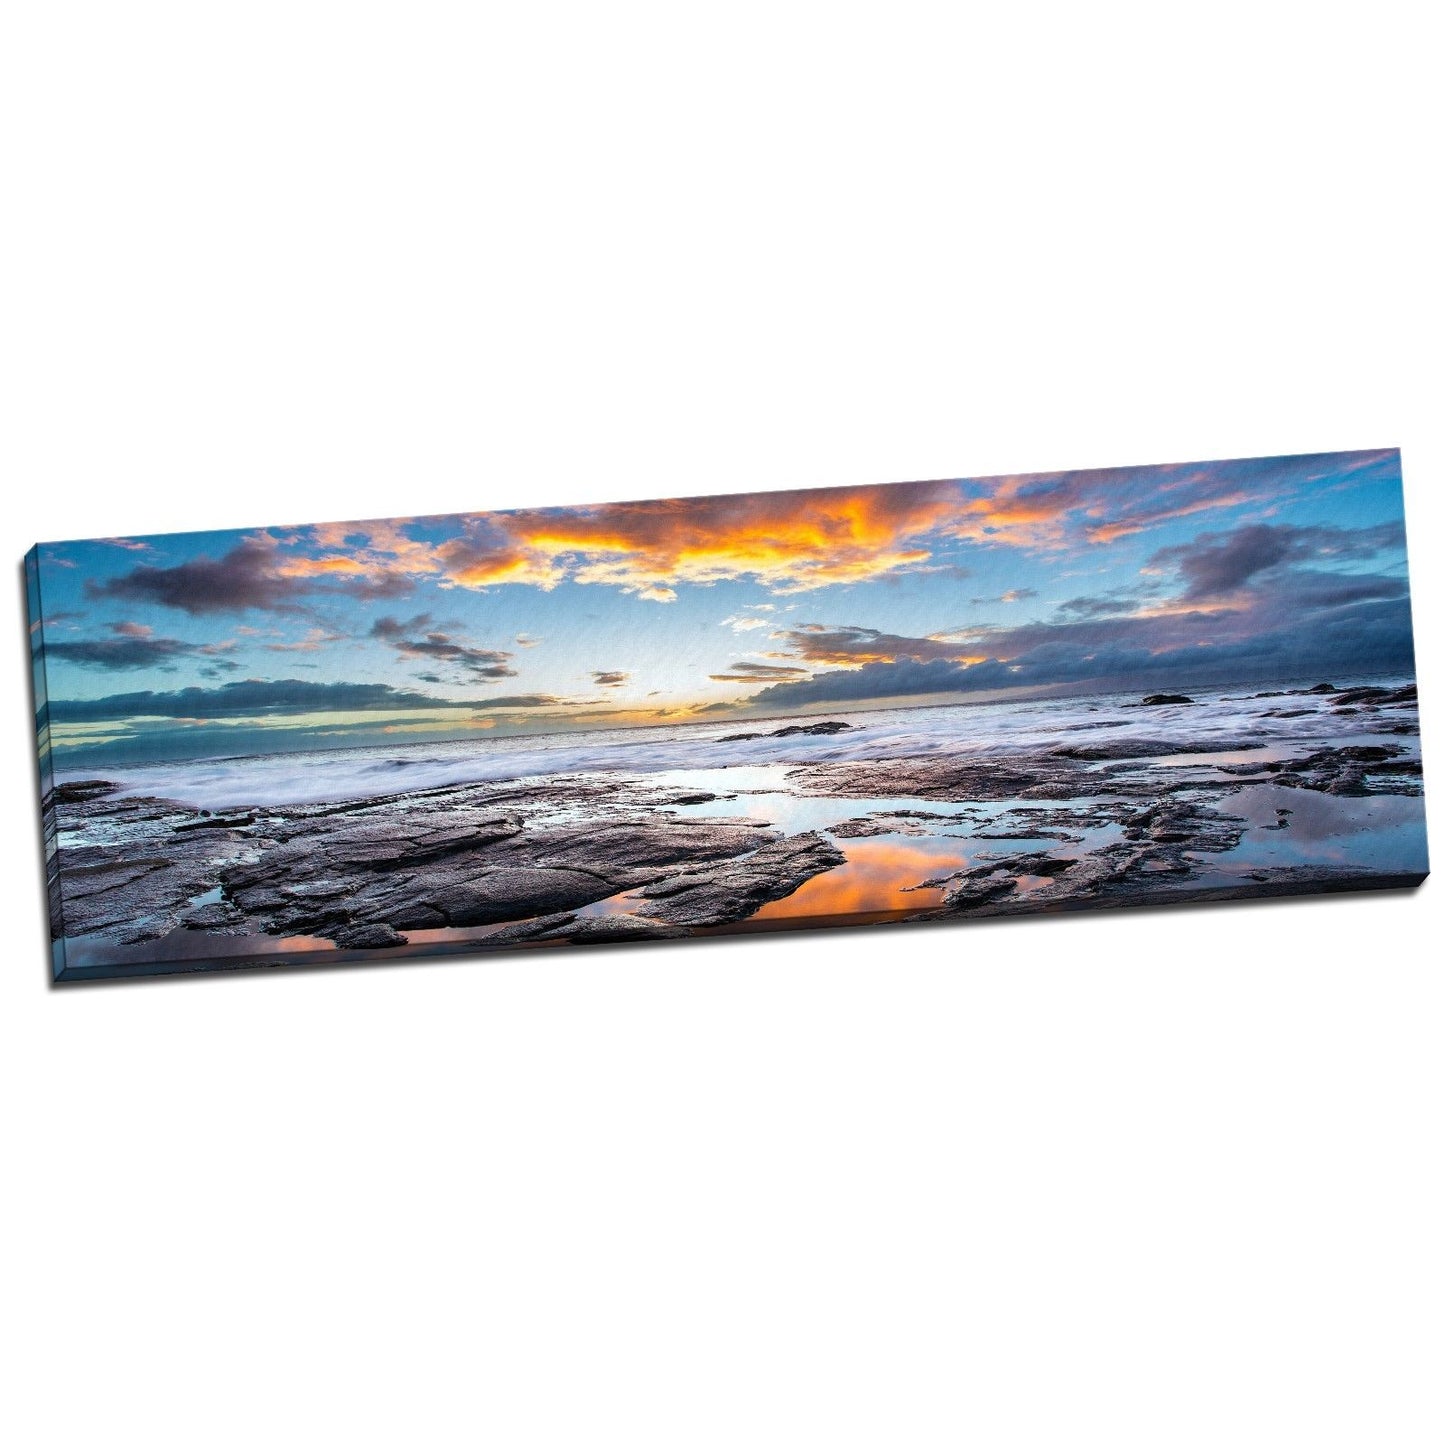 Stretched seascape time-lapse canvas Sunset beach ocean rock view wall art